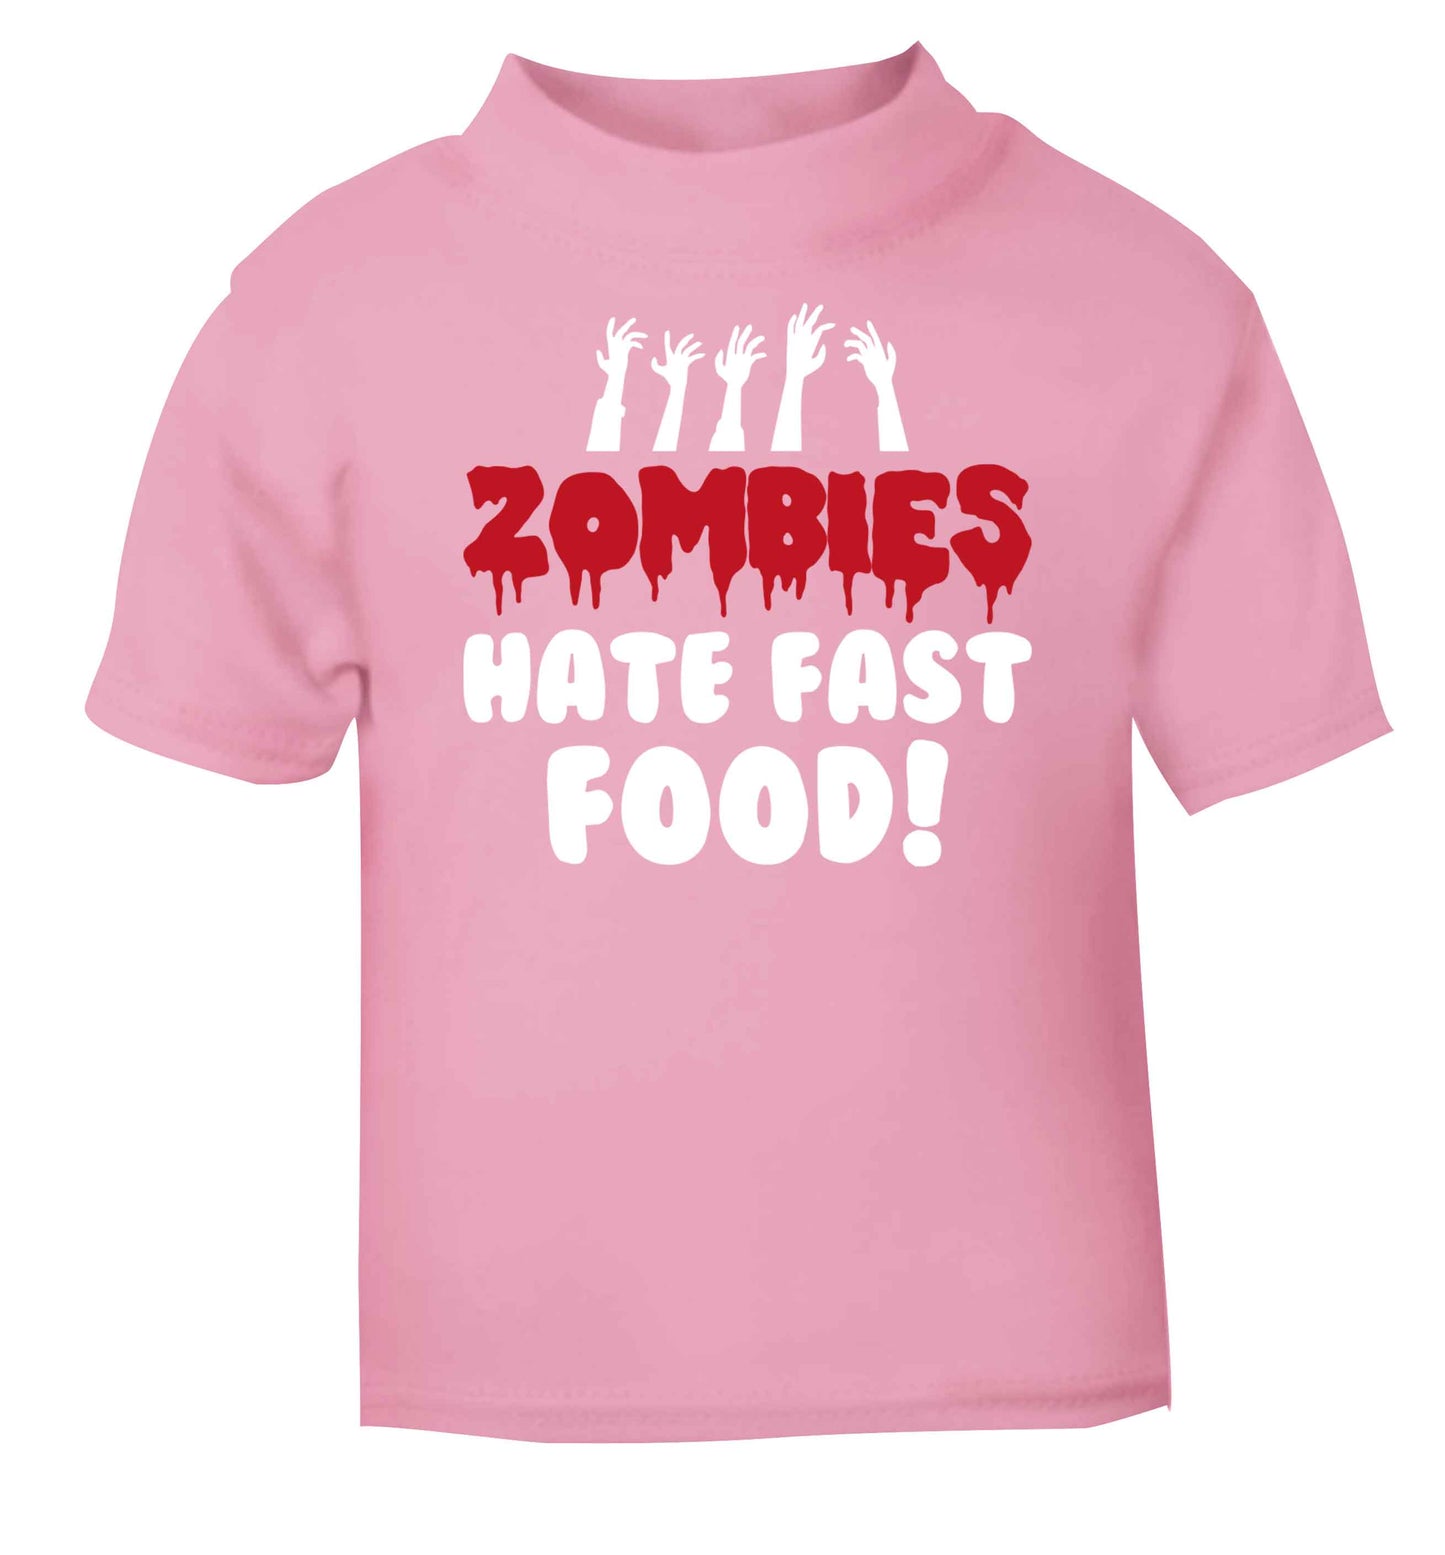 Zombies hate fast food light pink baby toddler Tshirt 2 Years